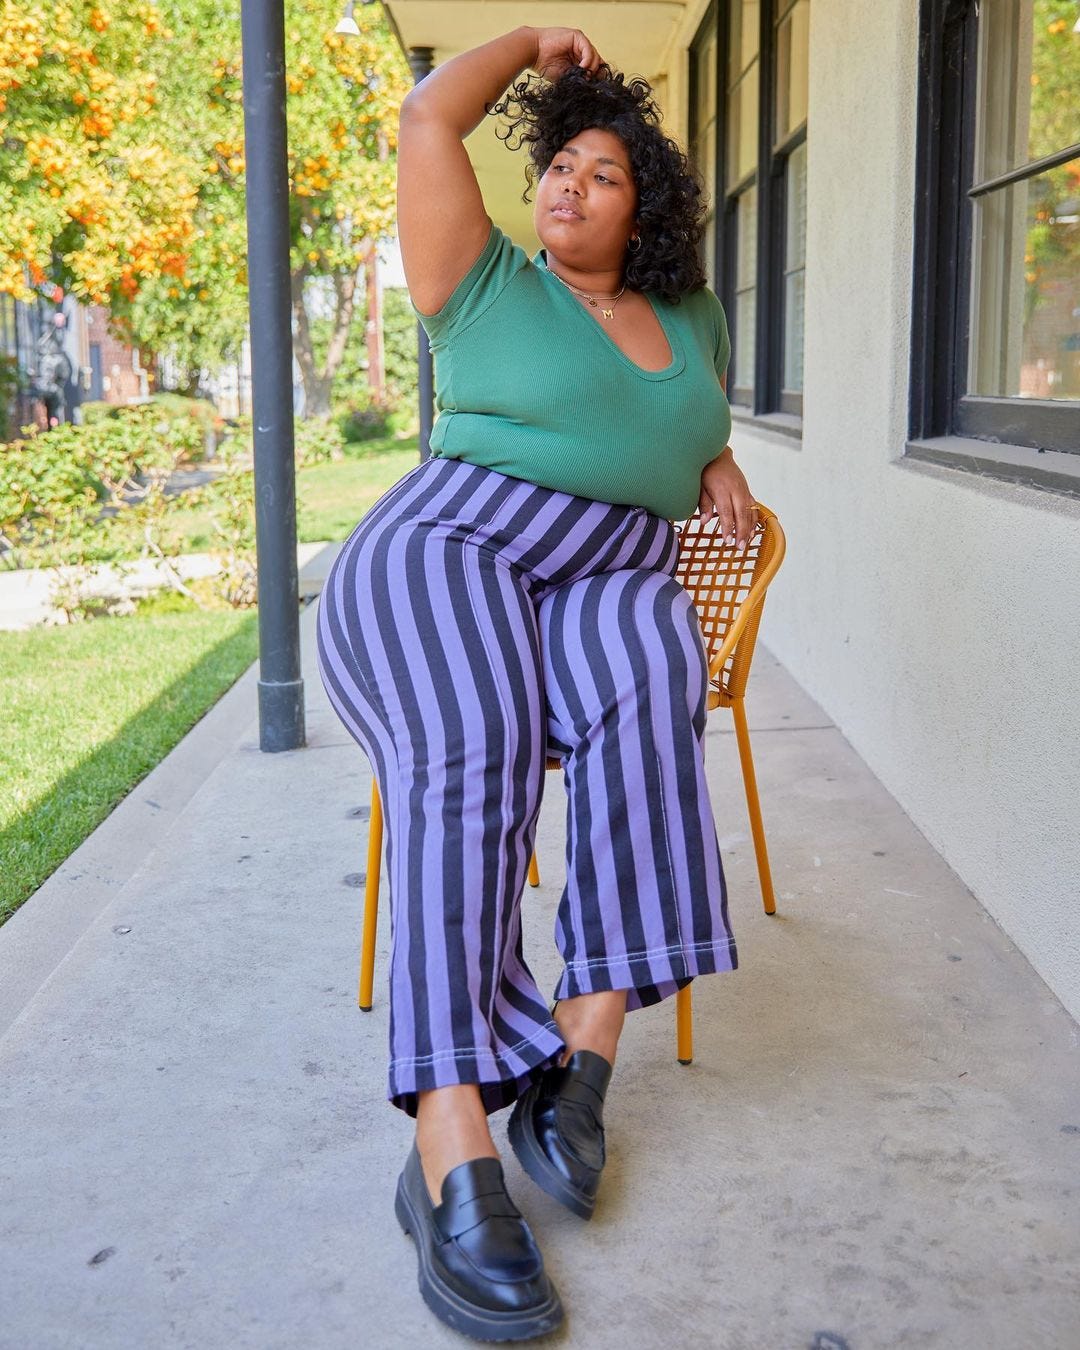 9 alt plus size clothing brands for my fat babes | by Dean Rodriguez |  Medium